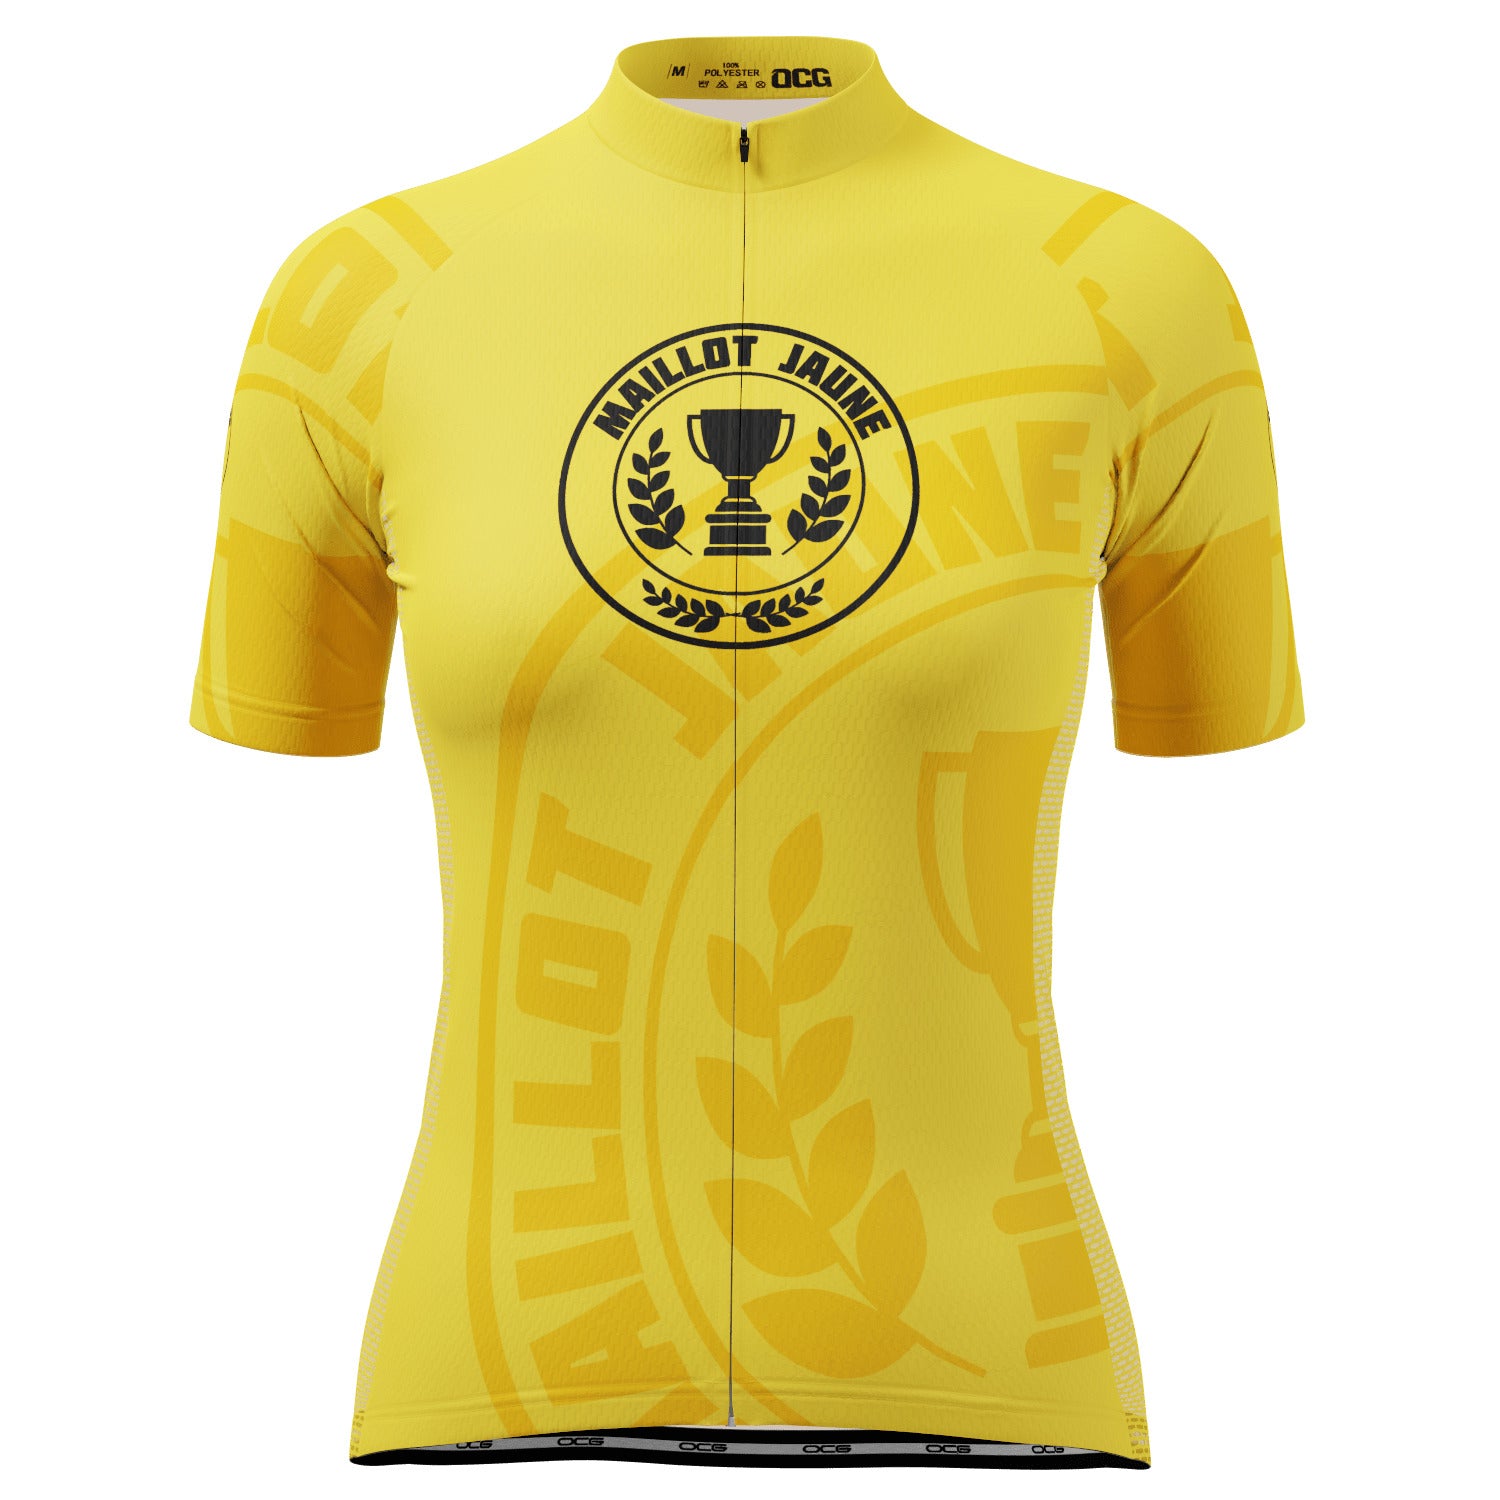 Women's Yellow Leaders Maillot Jaune Short Sleeve Cycling Jersey